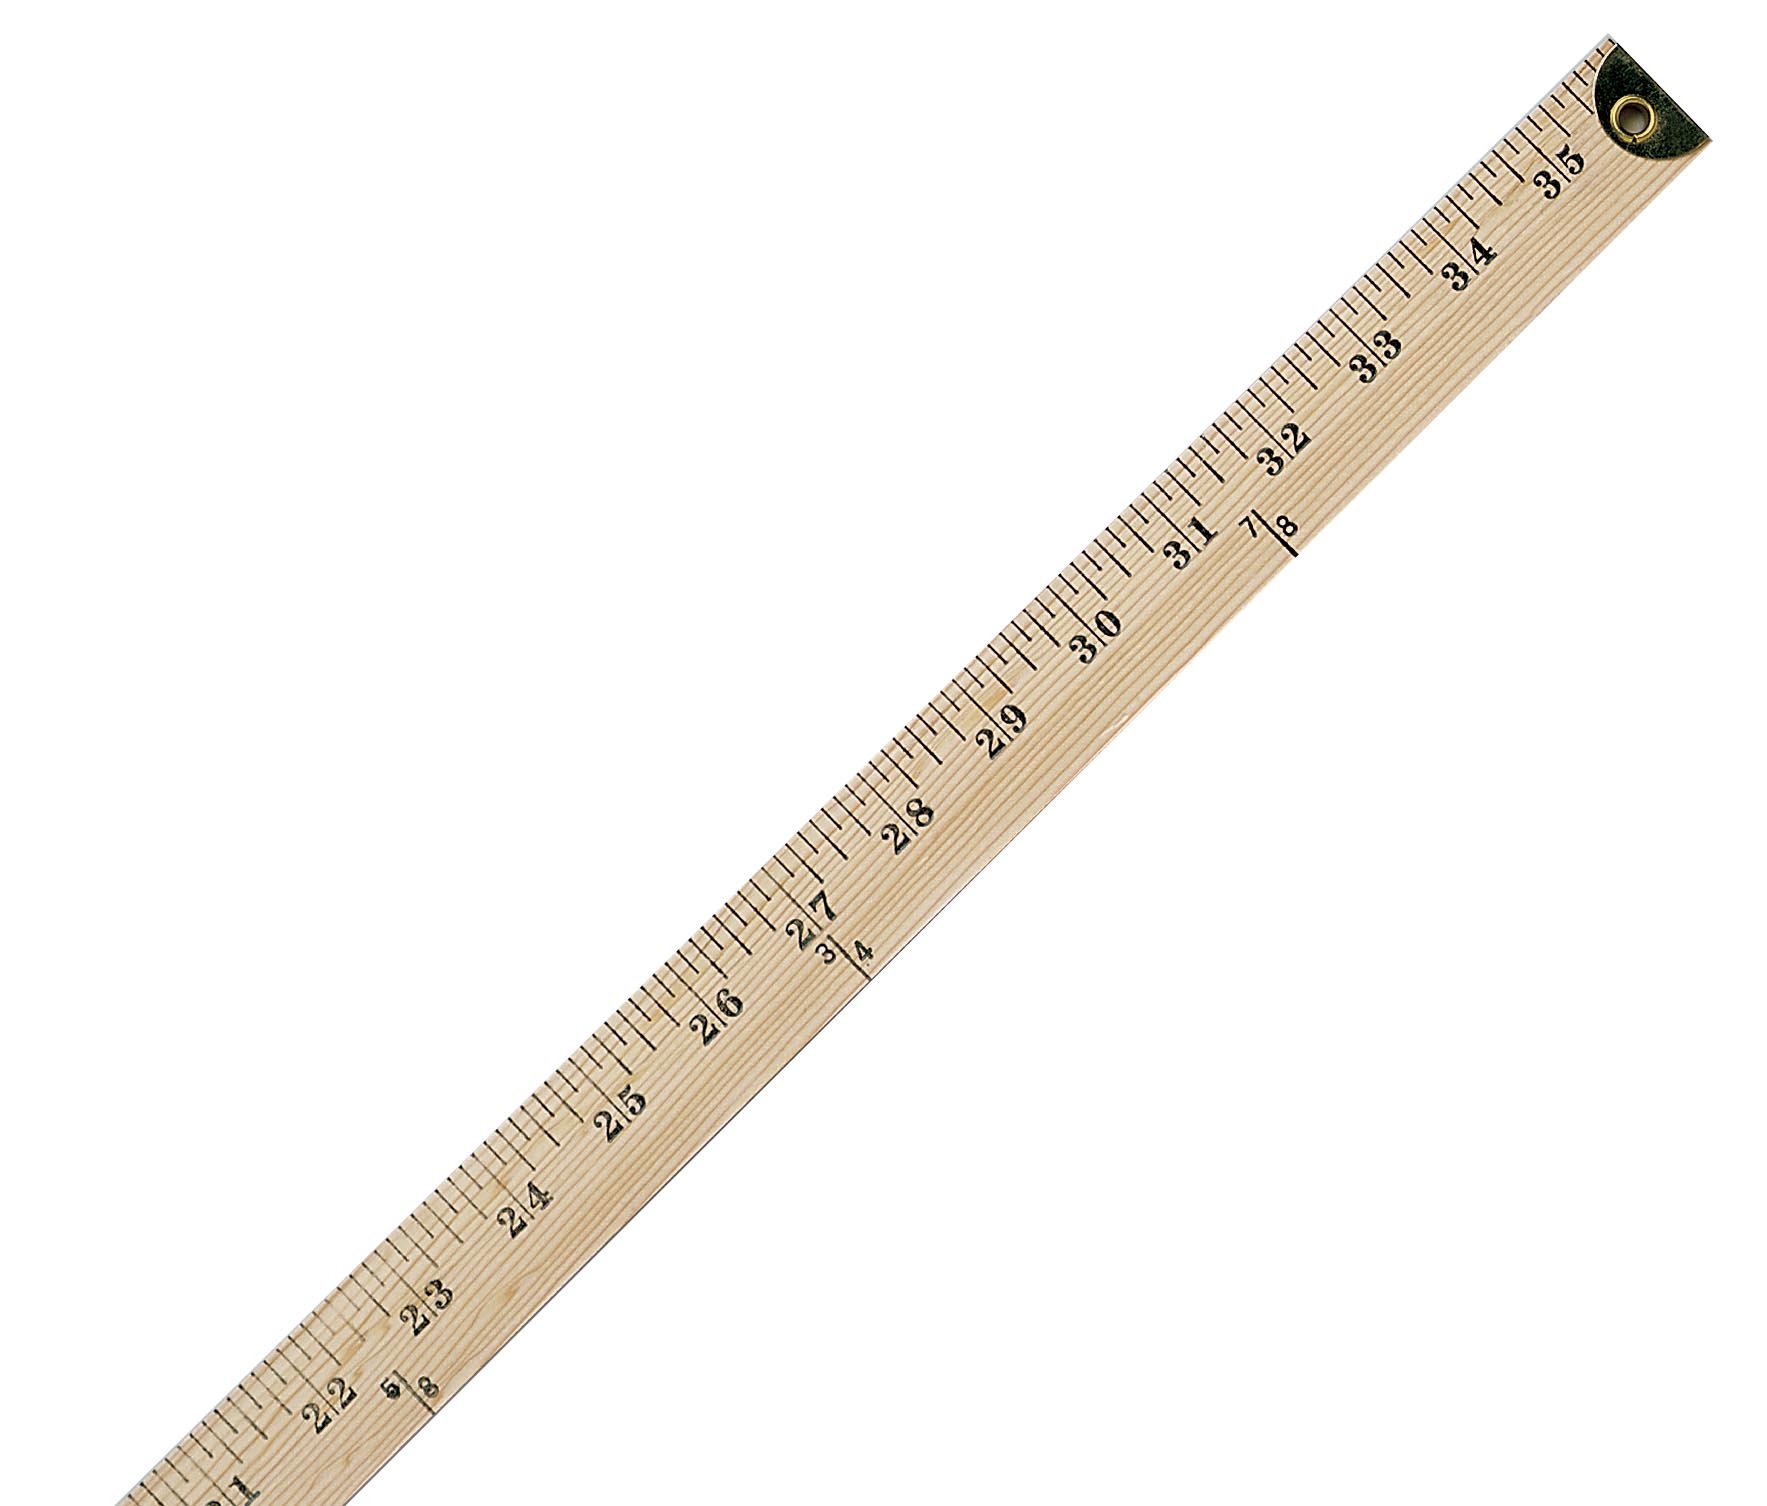 10425 Westcott Wooden Yardstick with Hang Hole and Brass Ends - New Clear Lacquer Finish 